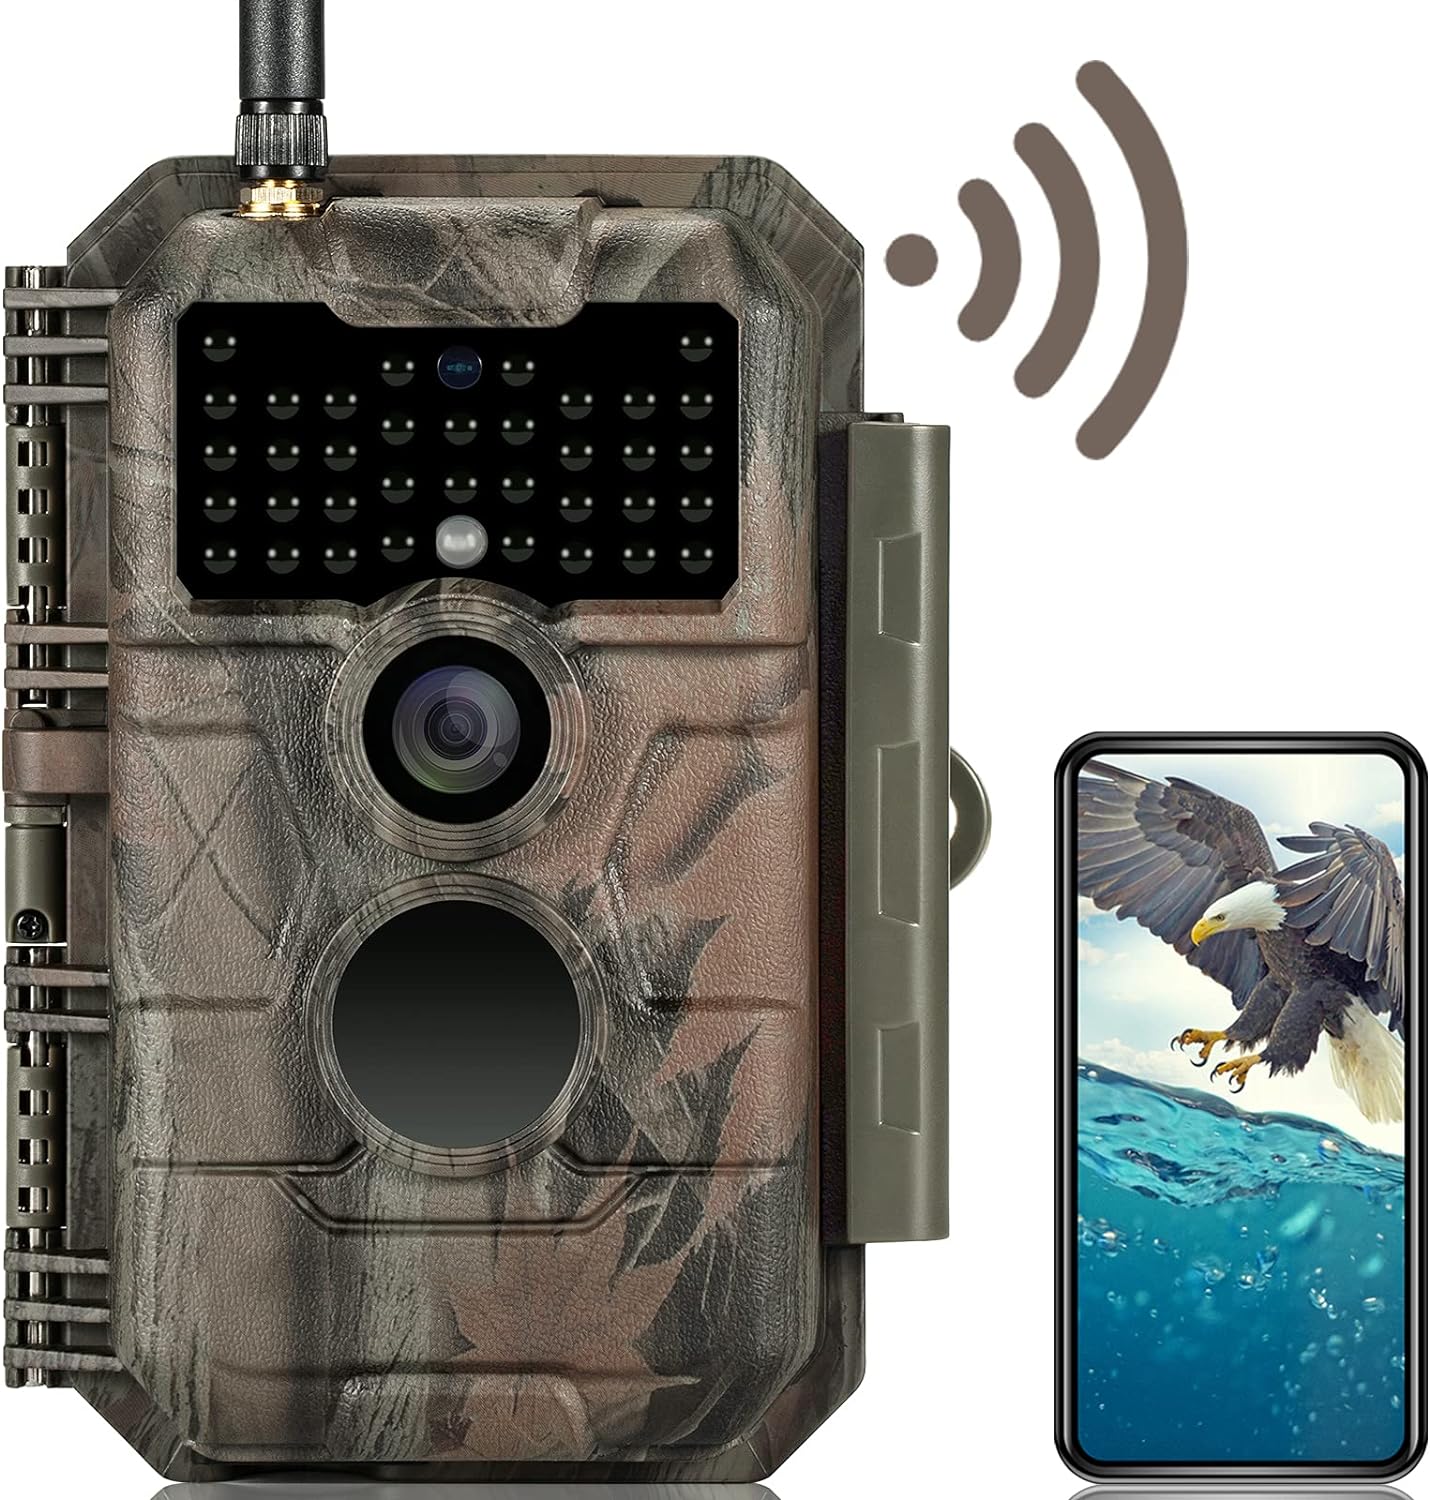 GardePro E6 Trail Camera WiFi 24MP 1296P Game Camera with No Glow Night Vision Motion Activated Waterproof for Wildlife Deer Scouting Hu